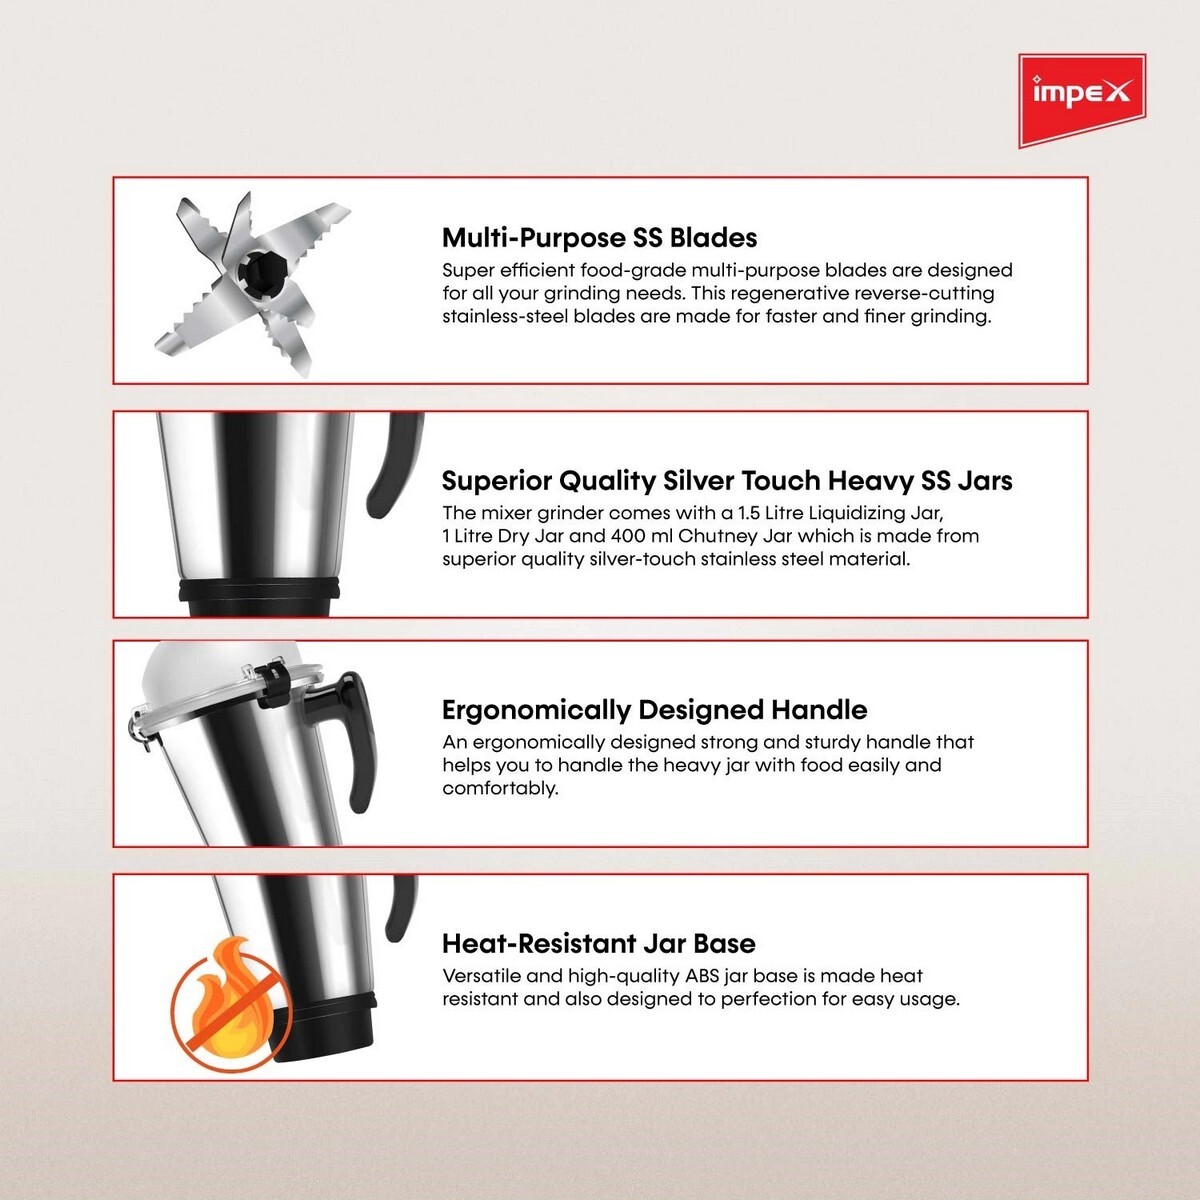 Impex Mixer Grinder Panther 3.0 800W